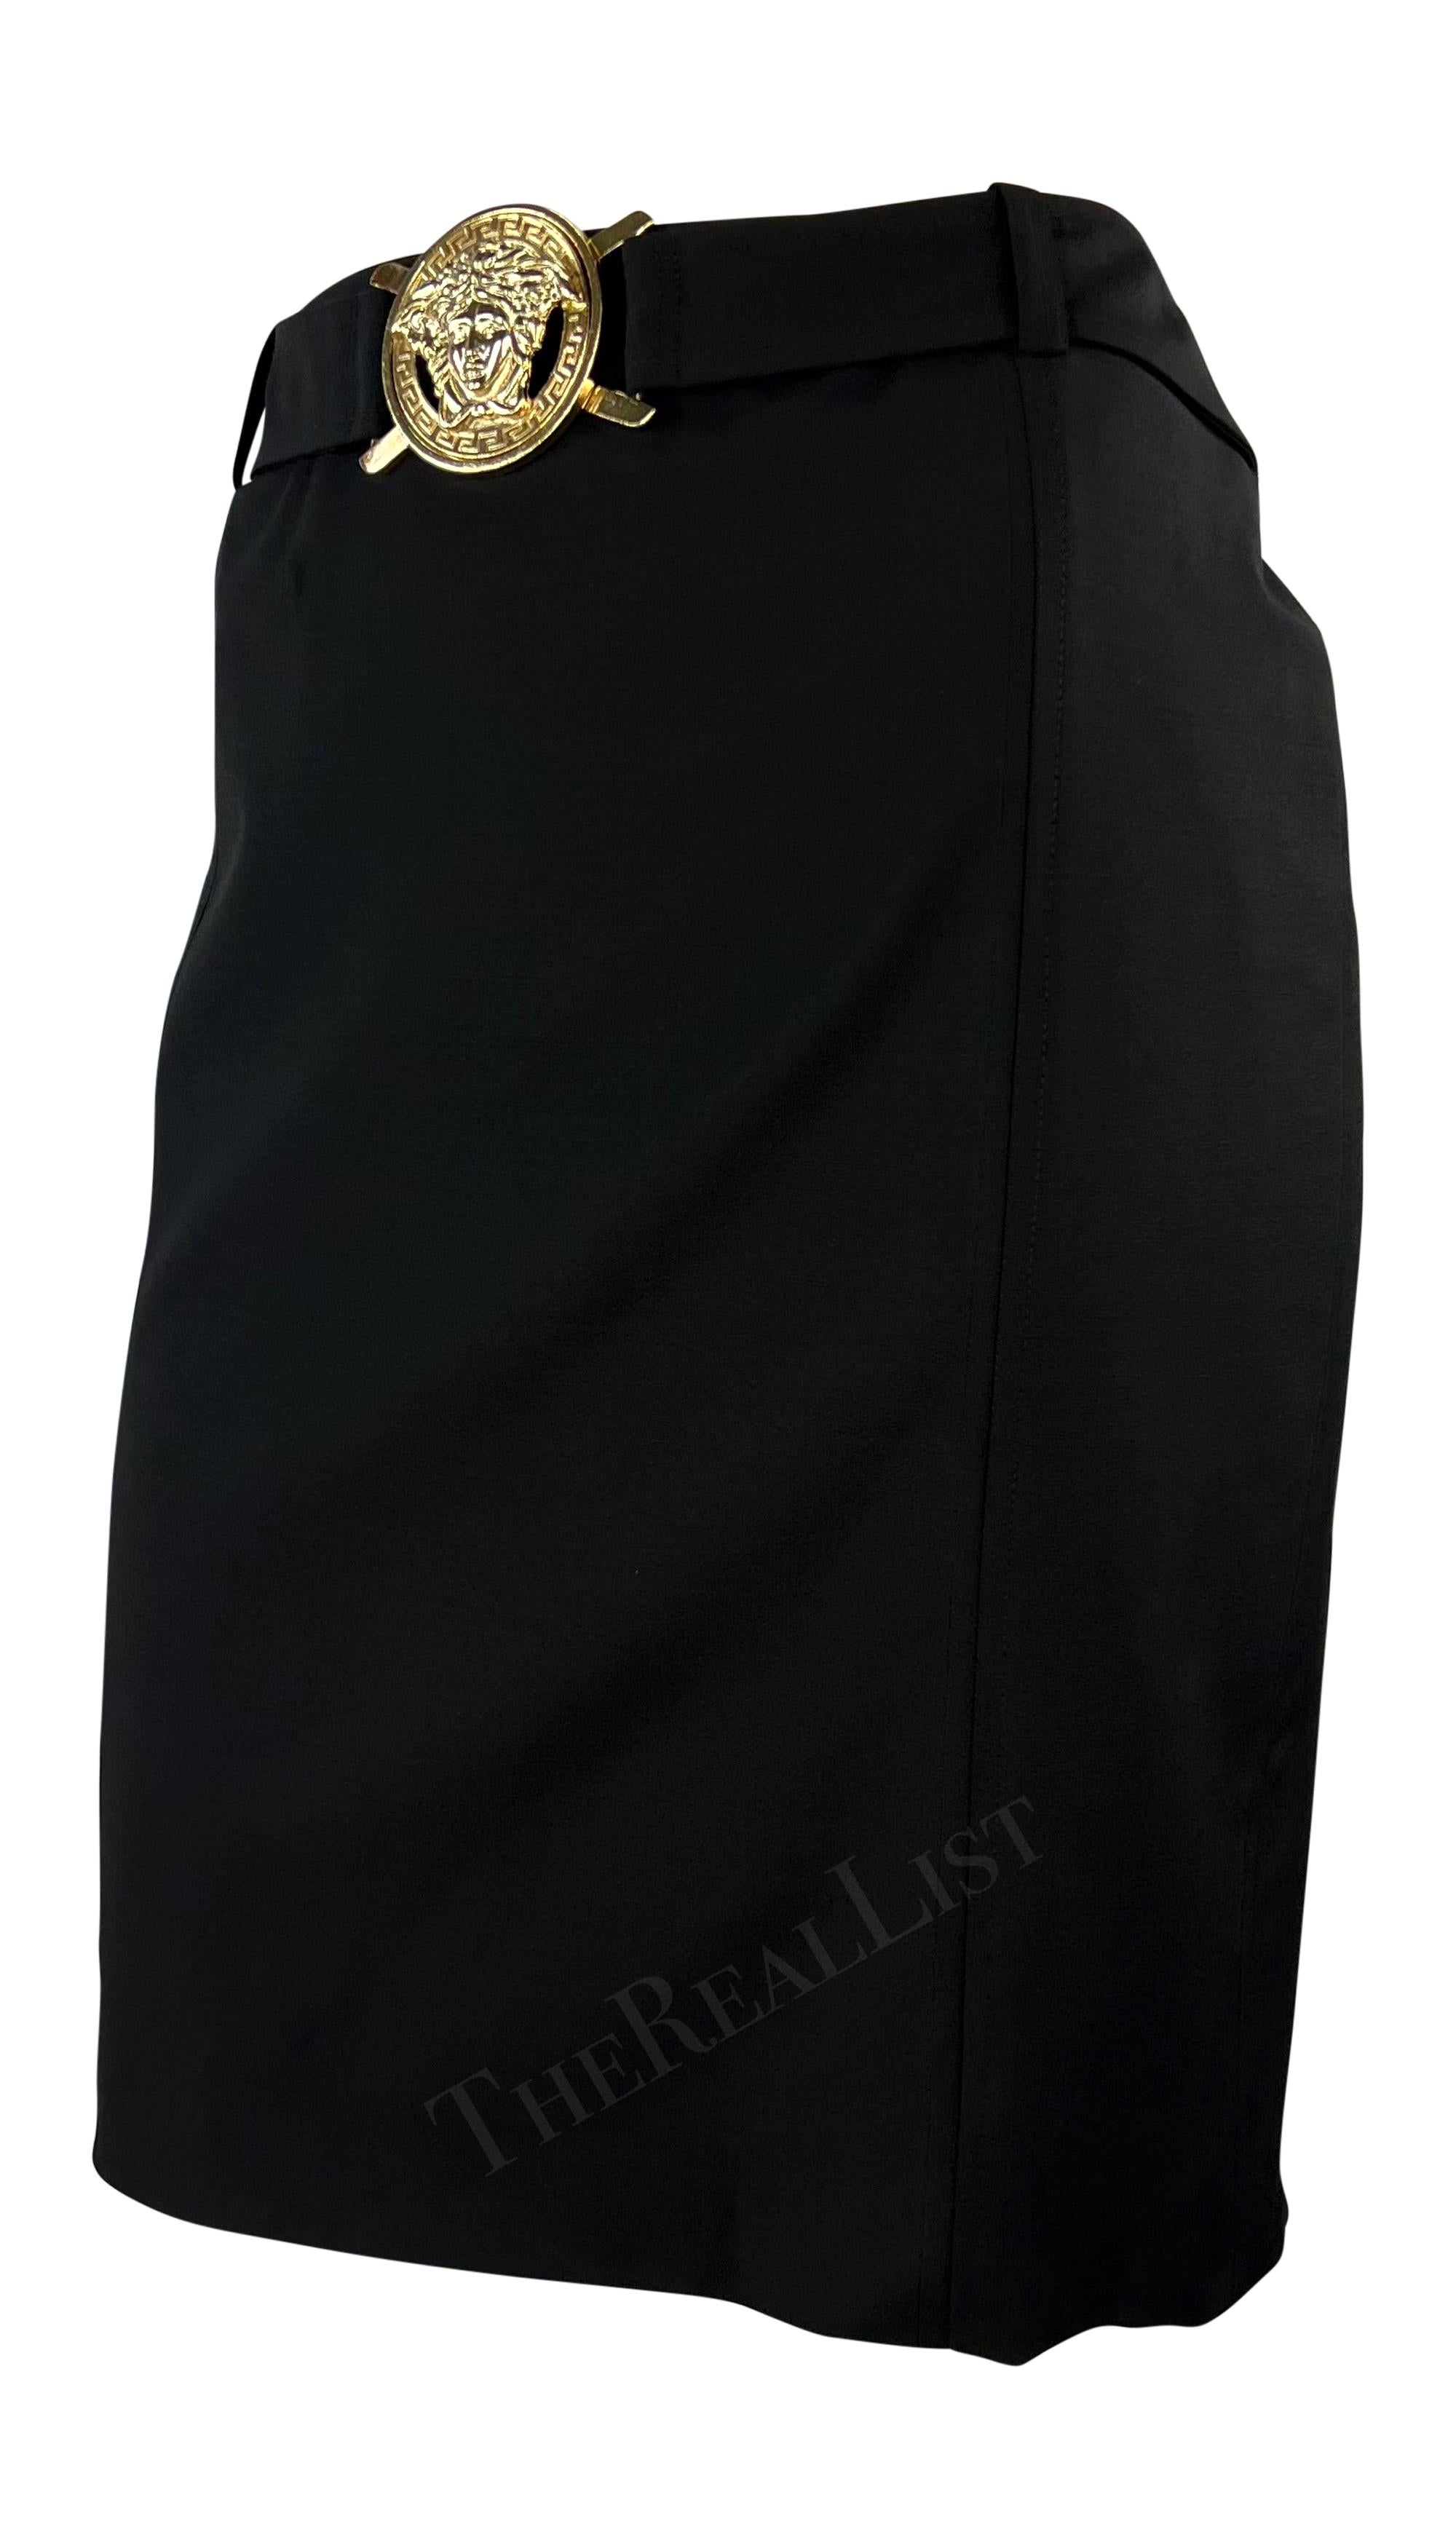 S/S 2005 Versace by Donatella Black Medusa Belt Pencil Skirt In Excellent Condition For Sale In West Hollywood, CA